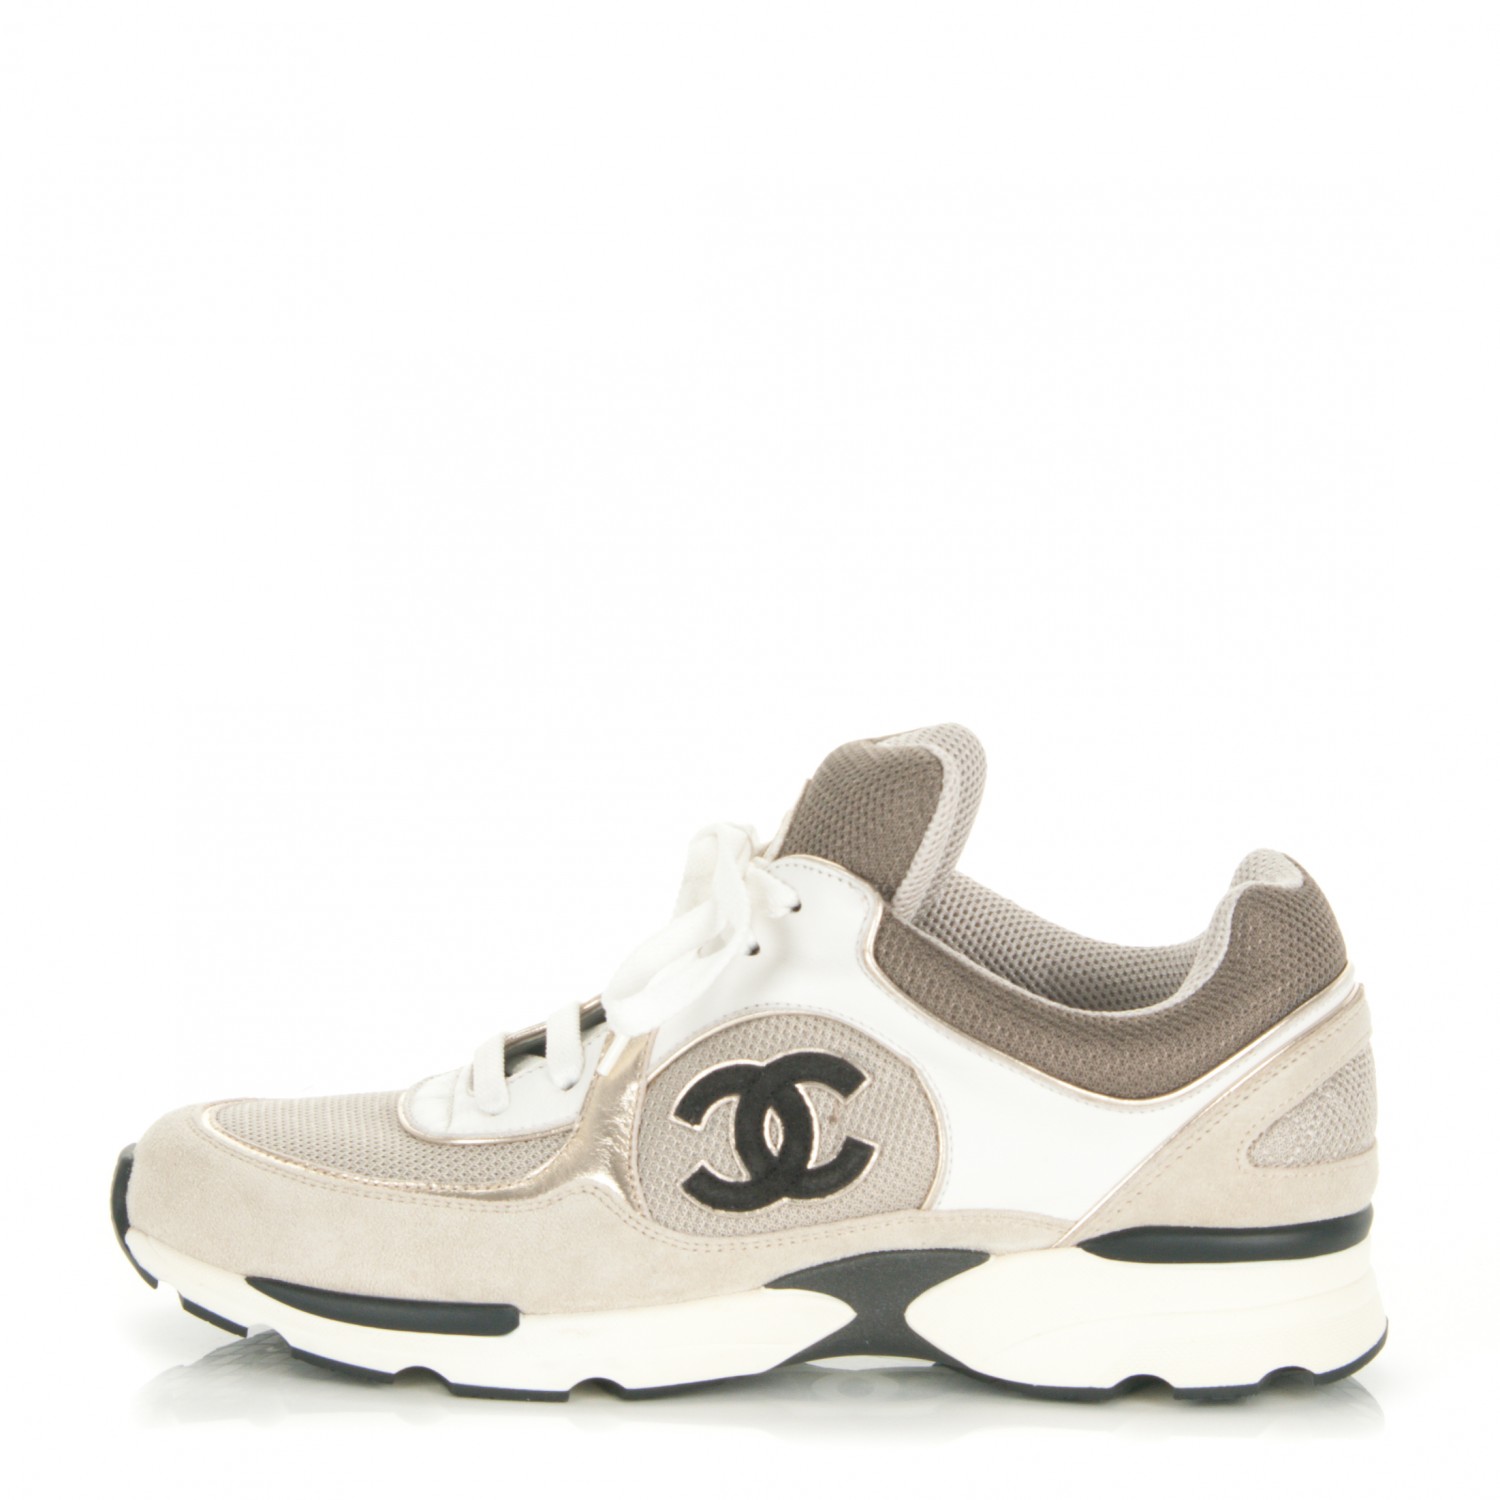 CHANEL Suede Calfskin CC Sneakers 40 